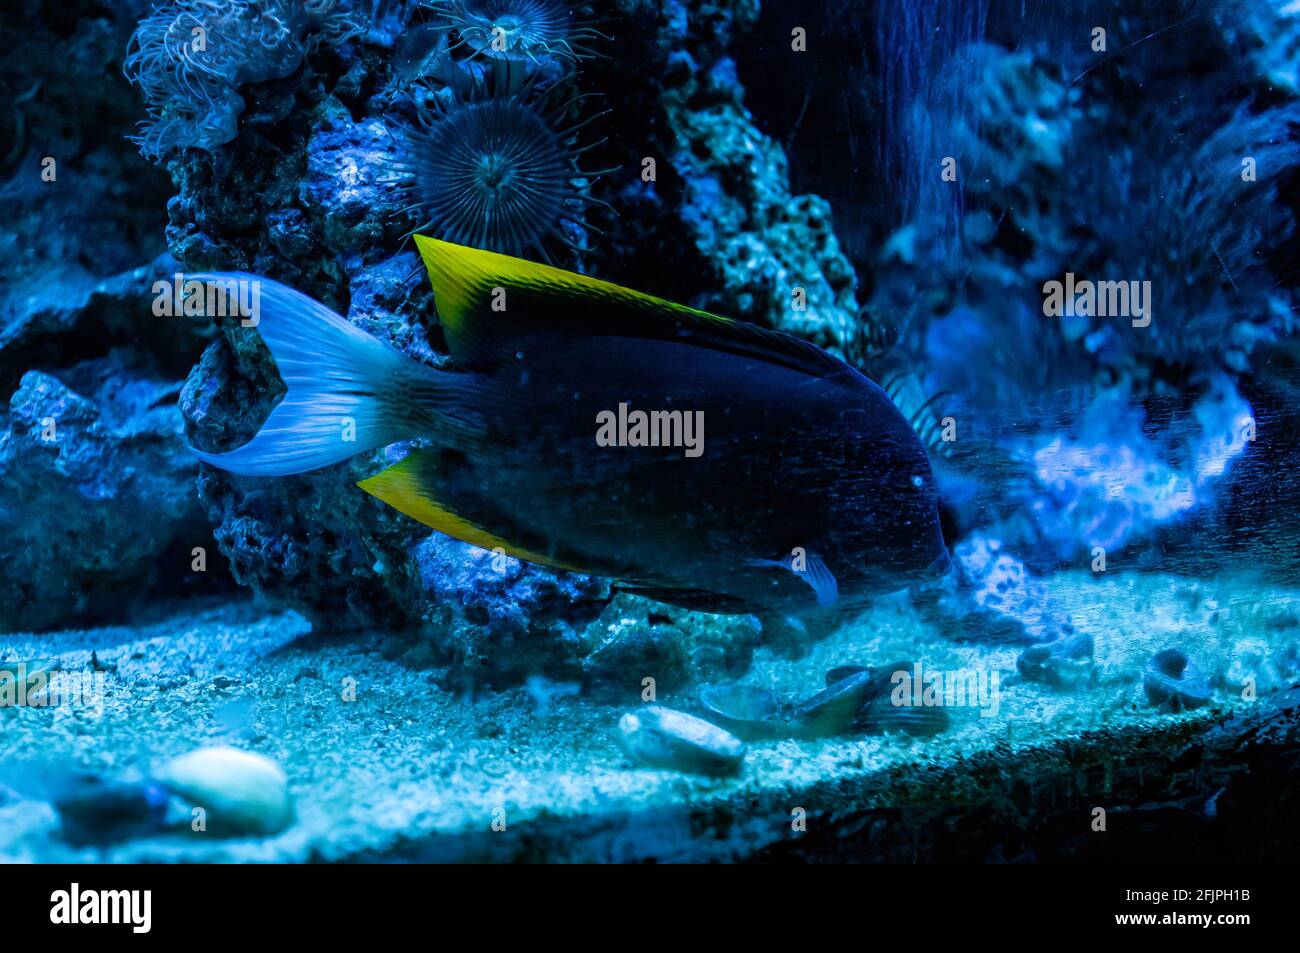 A Tomini surgeonfish (Ctenochaetus tominiensis - species of marine fish in the family Acanthuridae) swimming near the bottom of his water tank. Stock Photo